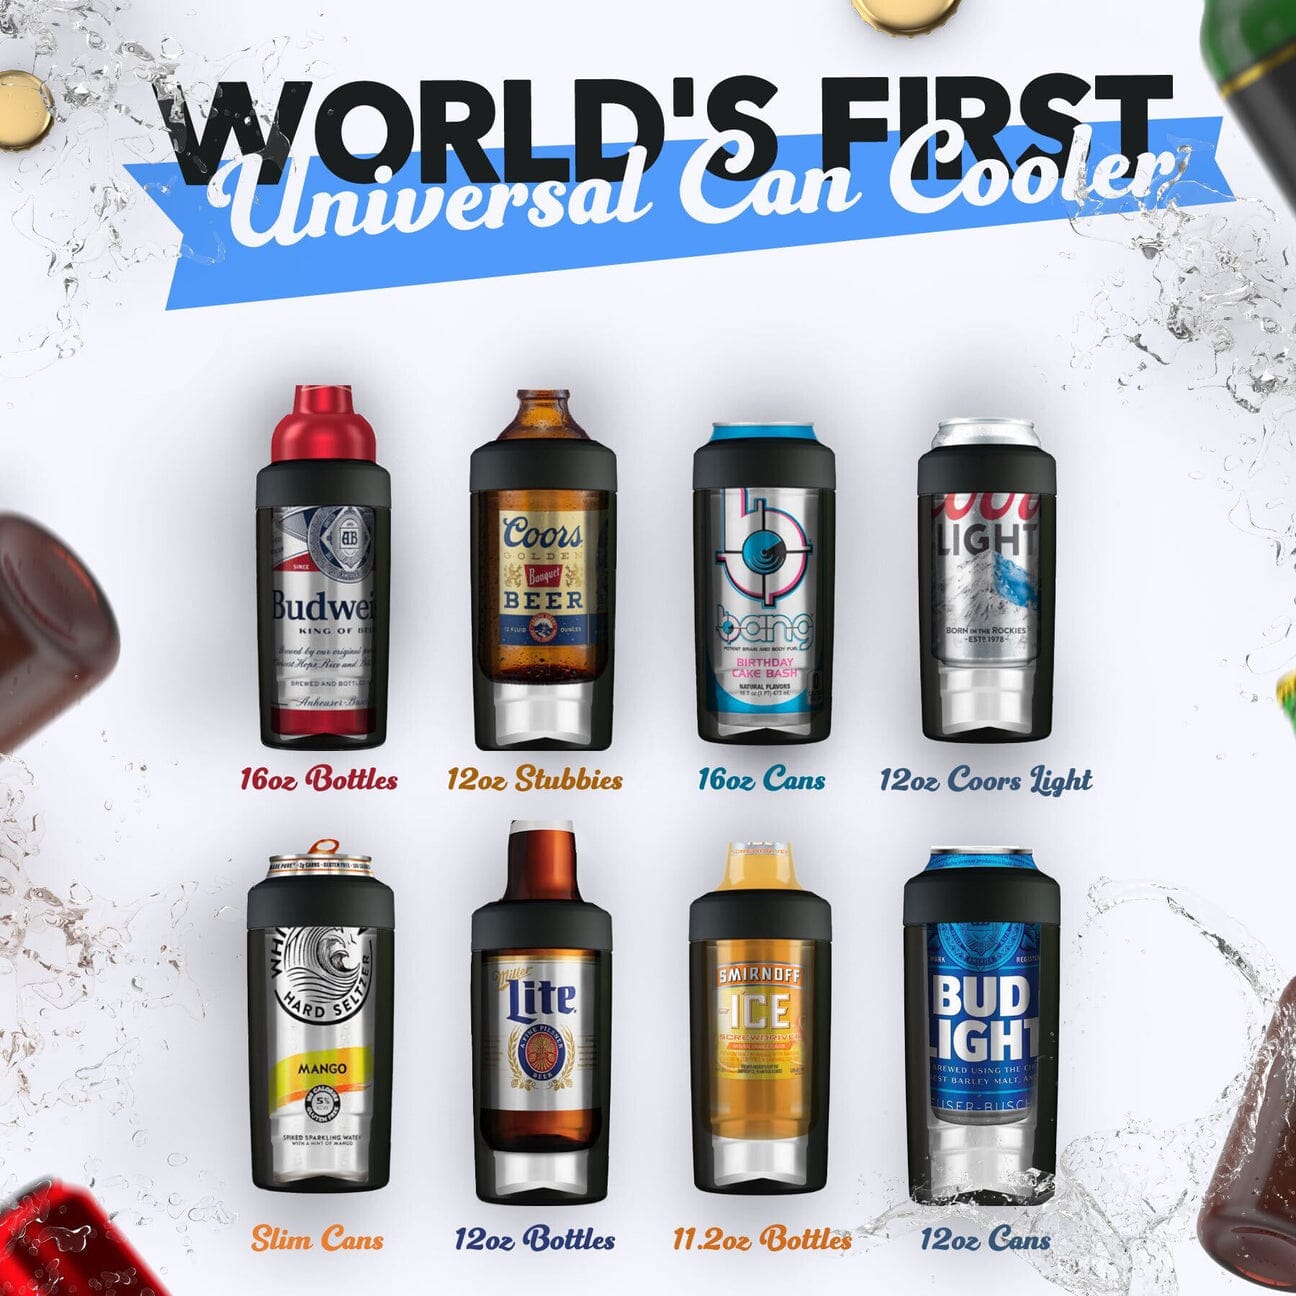 Universal Frost Buddy all in one beverage cooler. CUSTOMIZABLE w